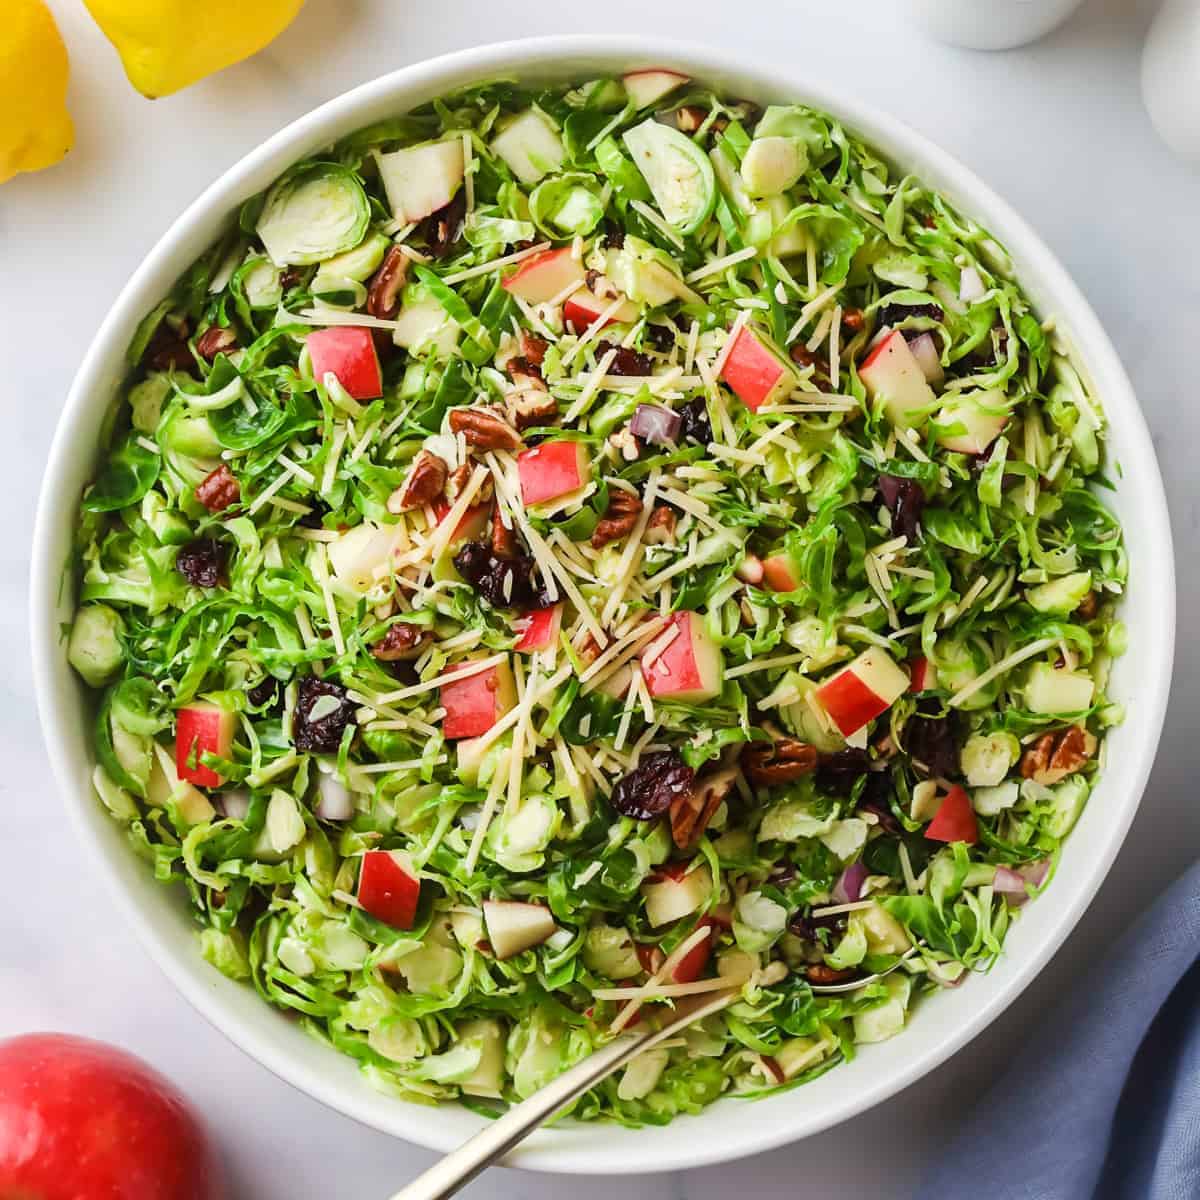 Shaved brussels sprouts in a white bowl topped with pecans, diced red apples, shredded parmesan cheese and dried cranberries. A red apple, lemons and a blue towel surround the bowl. A serving utensil sits inside the salad.